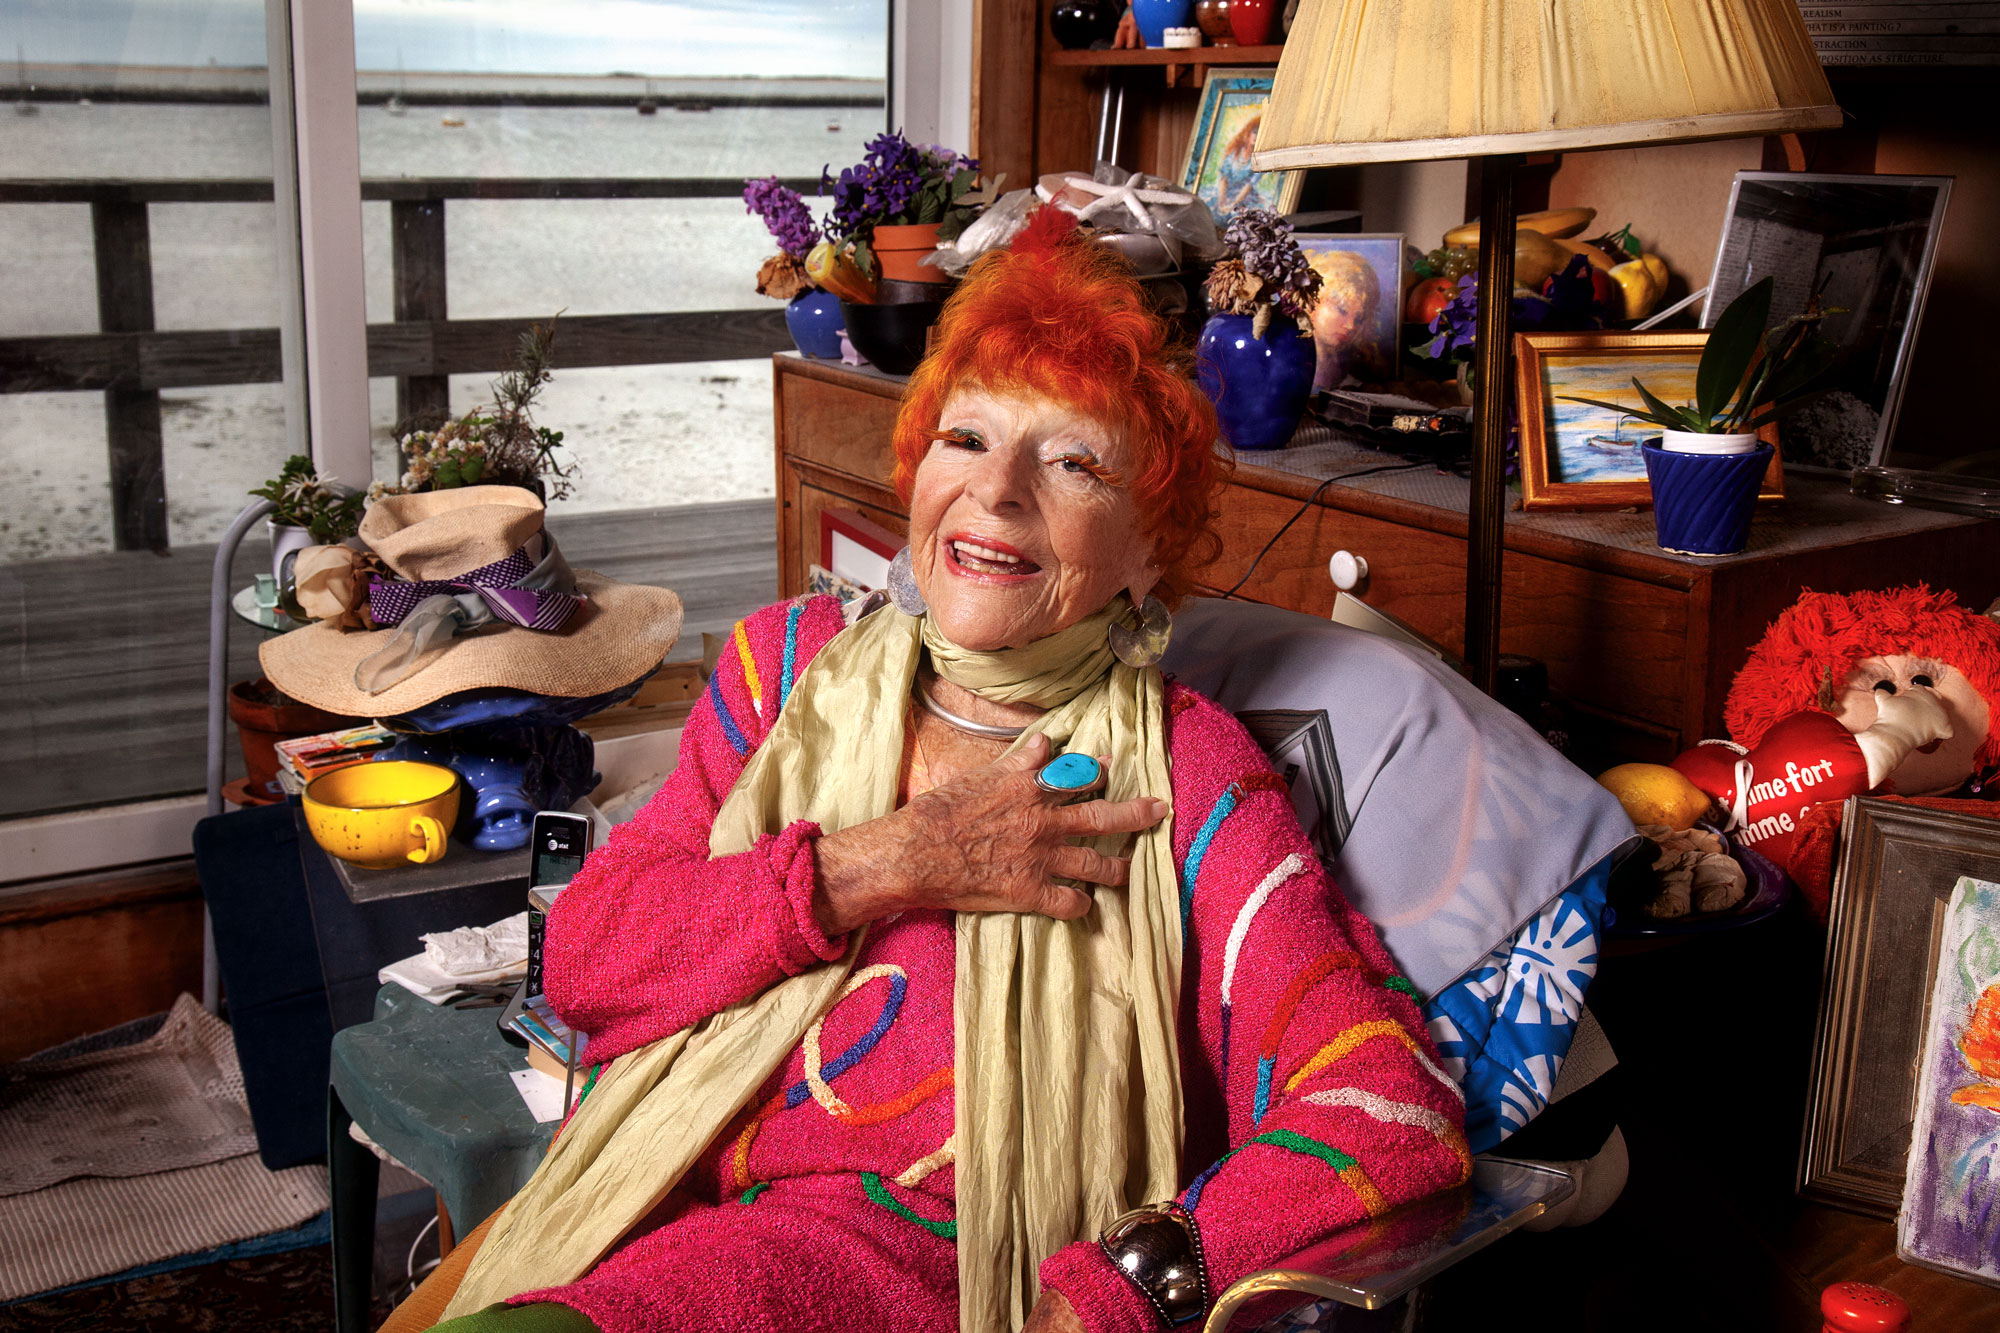 Ilona Royce-Smithkin with bright red hair, clothing photographed at home in Provincetown with a view of the ocean through sliding deck doors behind her.